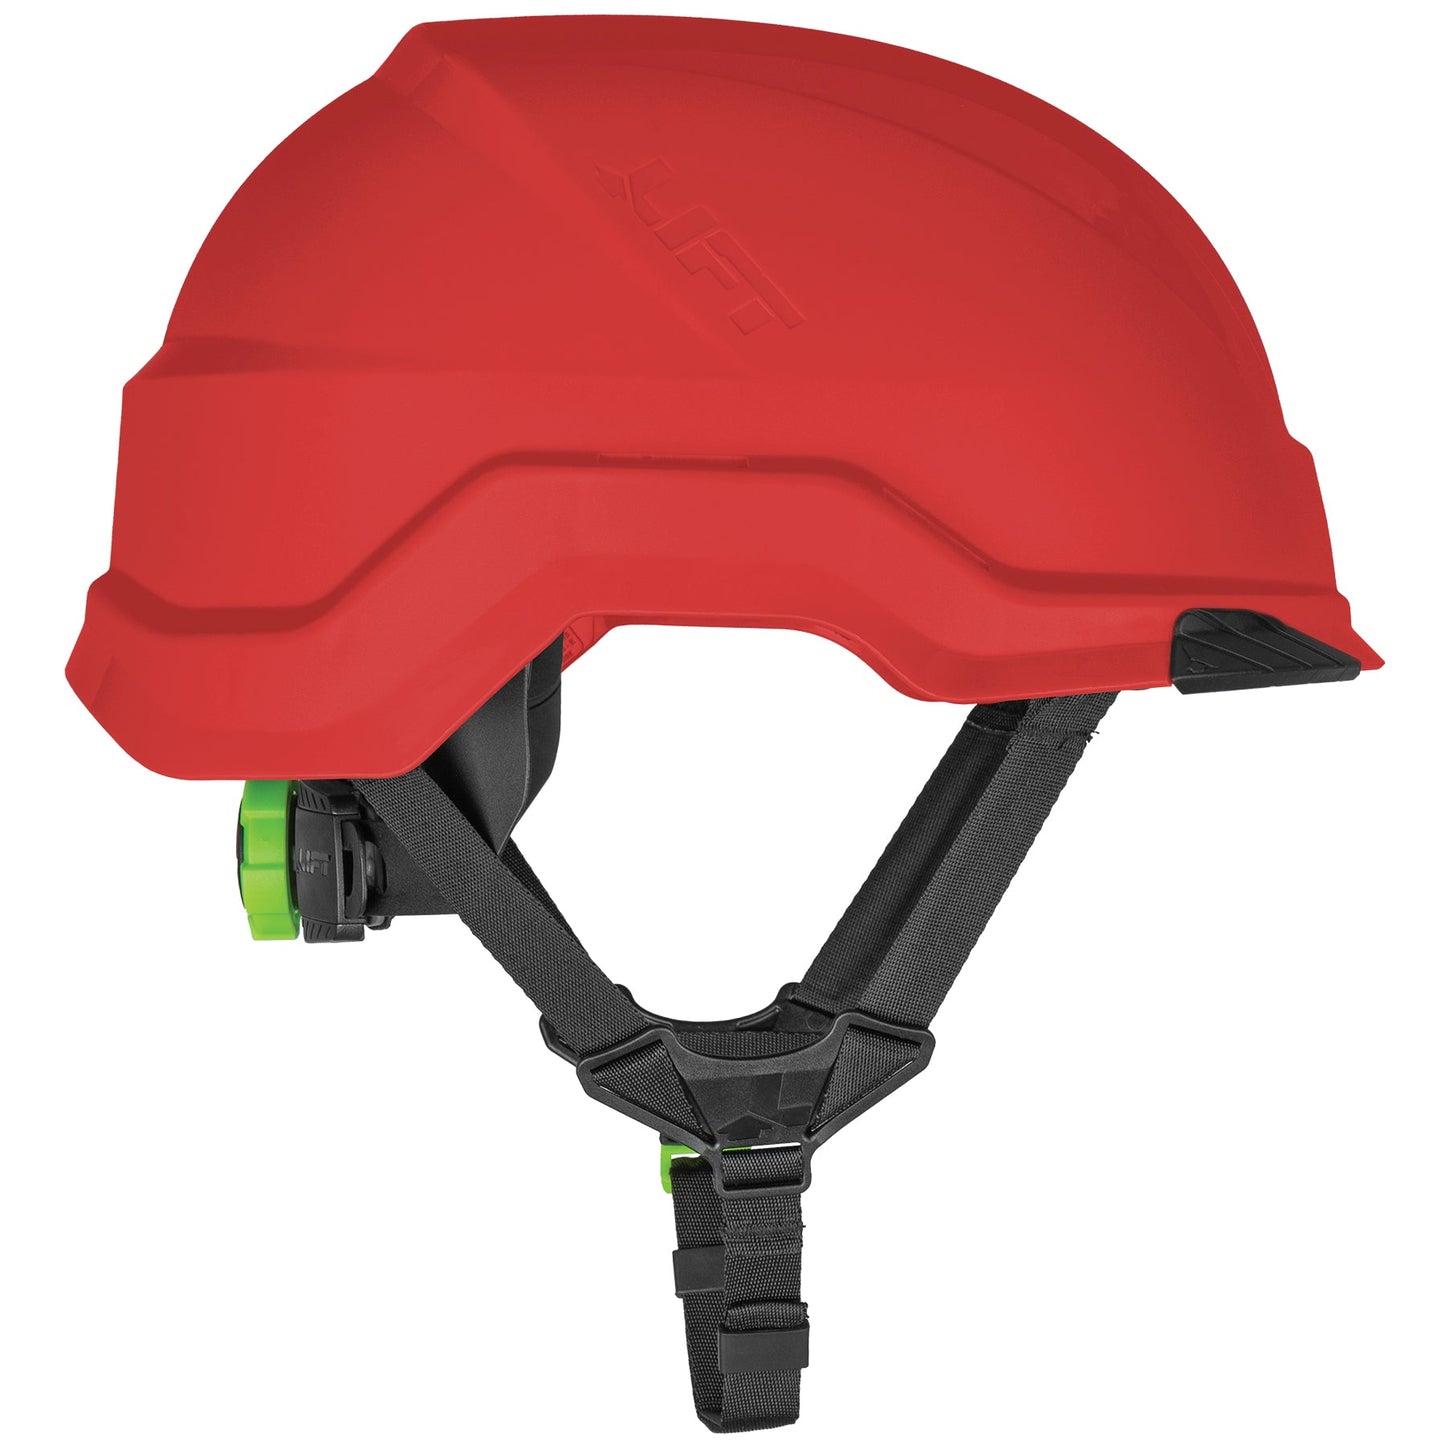 RADIX Safety Helmet - Non-Vented - LIFT Safety